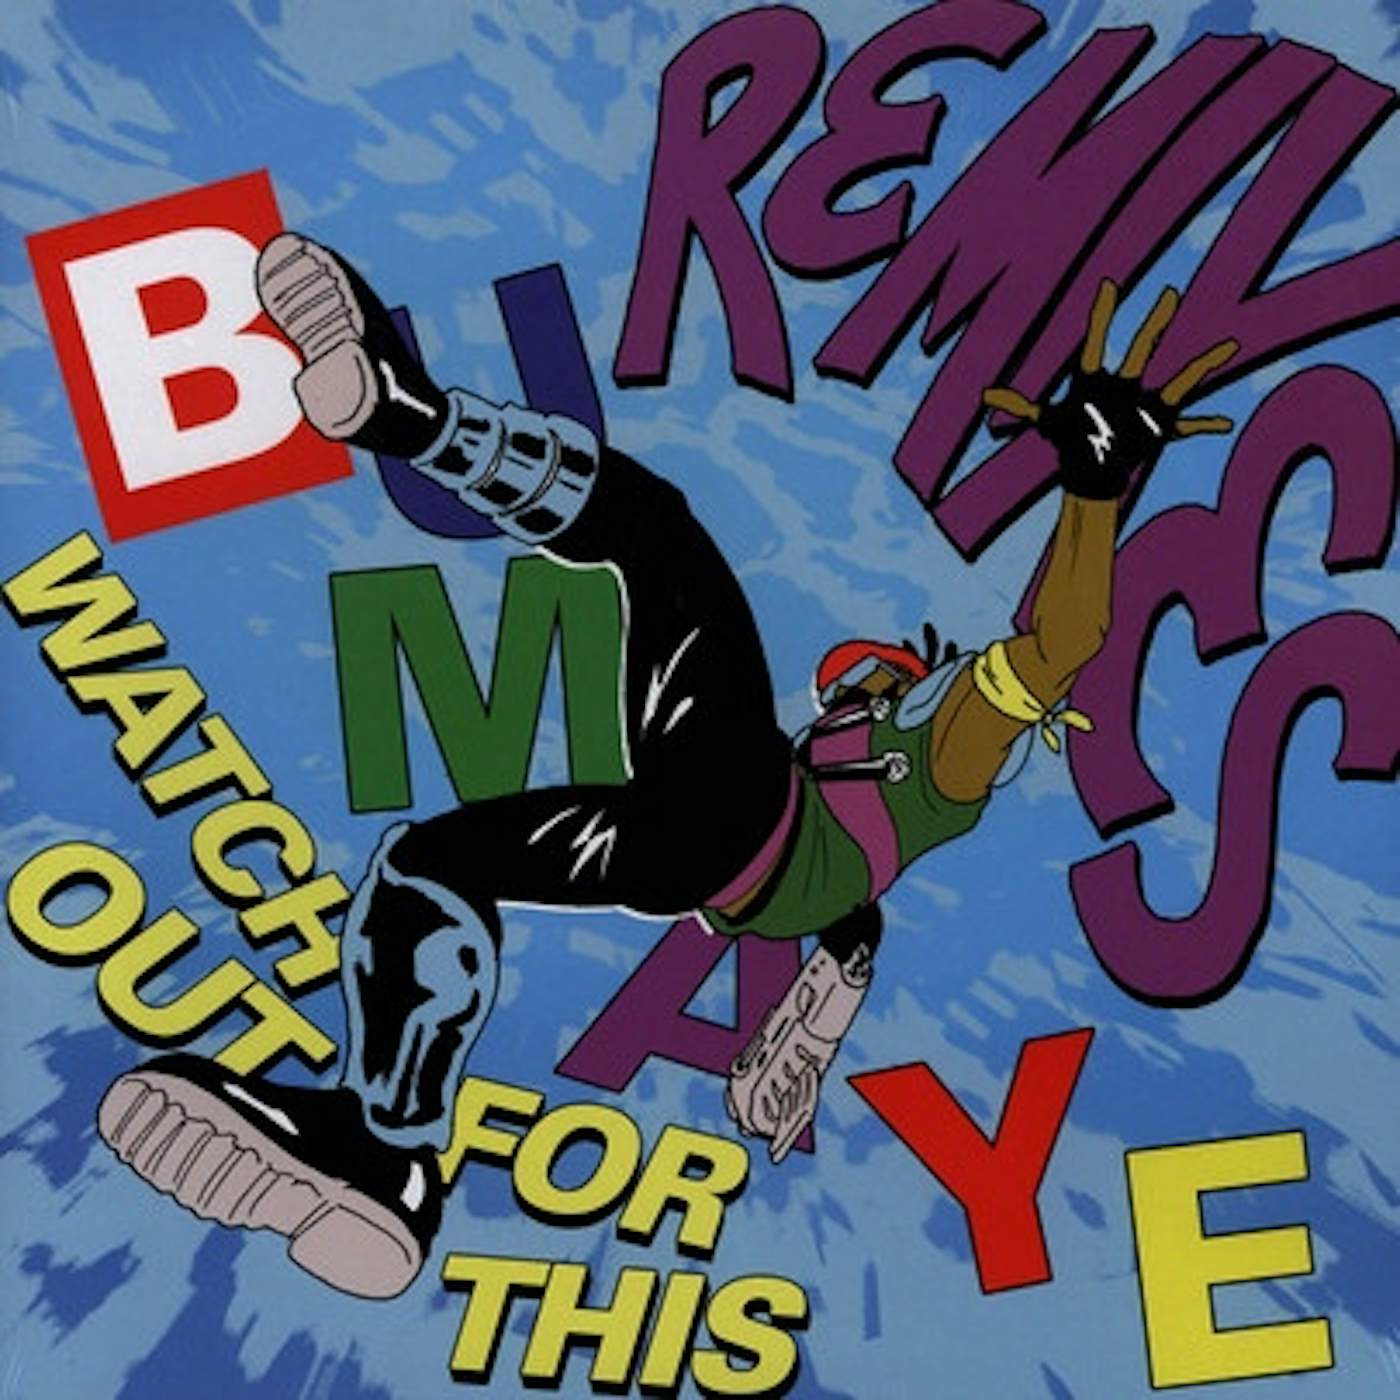 Major Lazer Watch Out For This (Bumaye) Vinyl Record